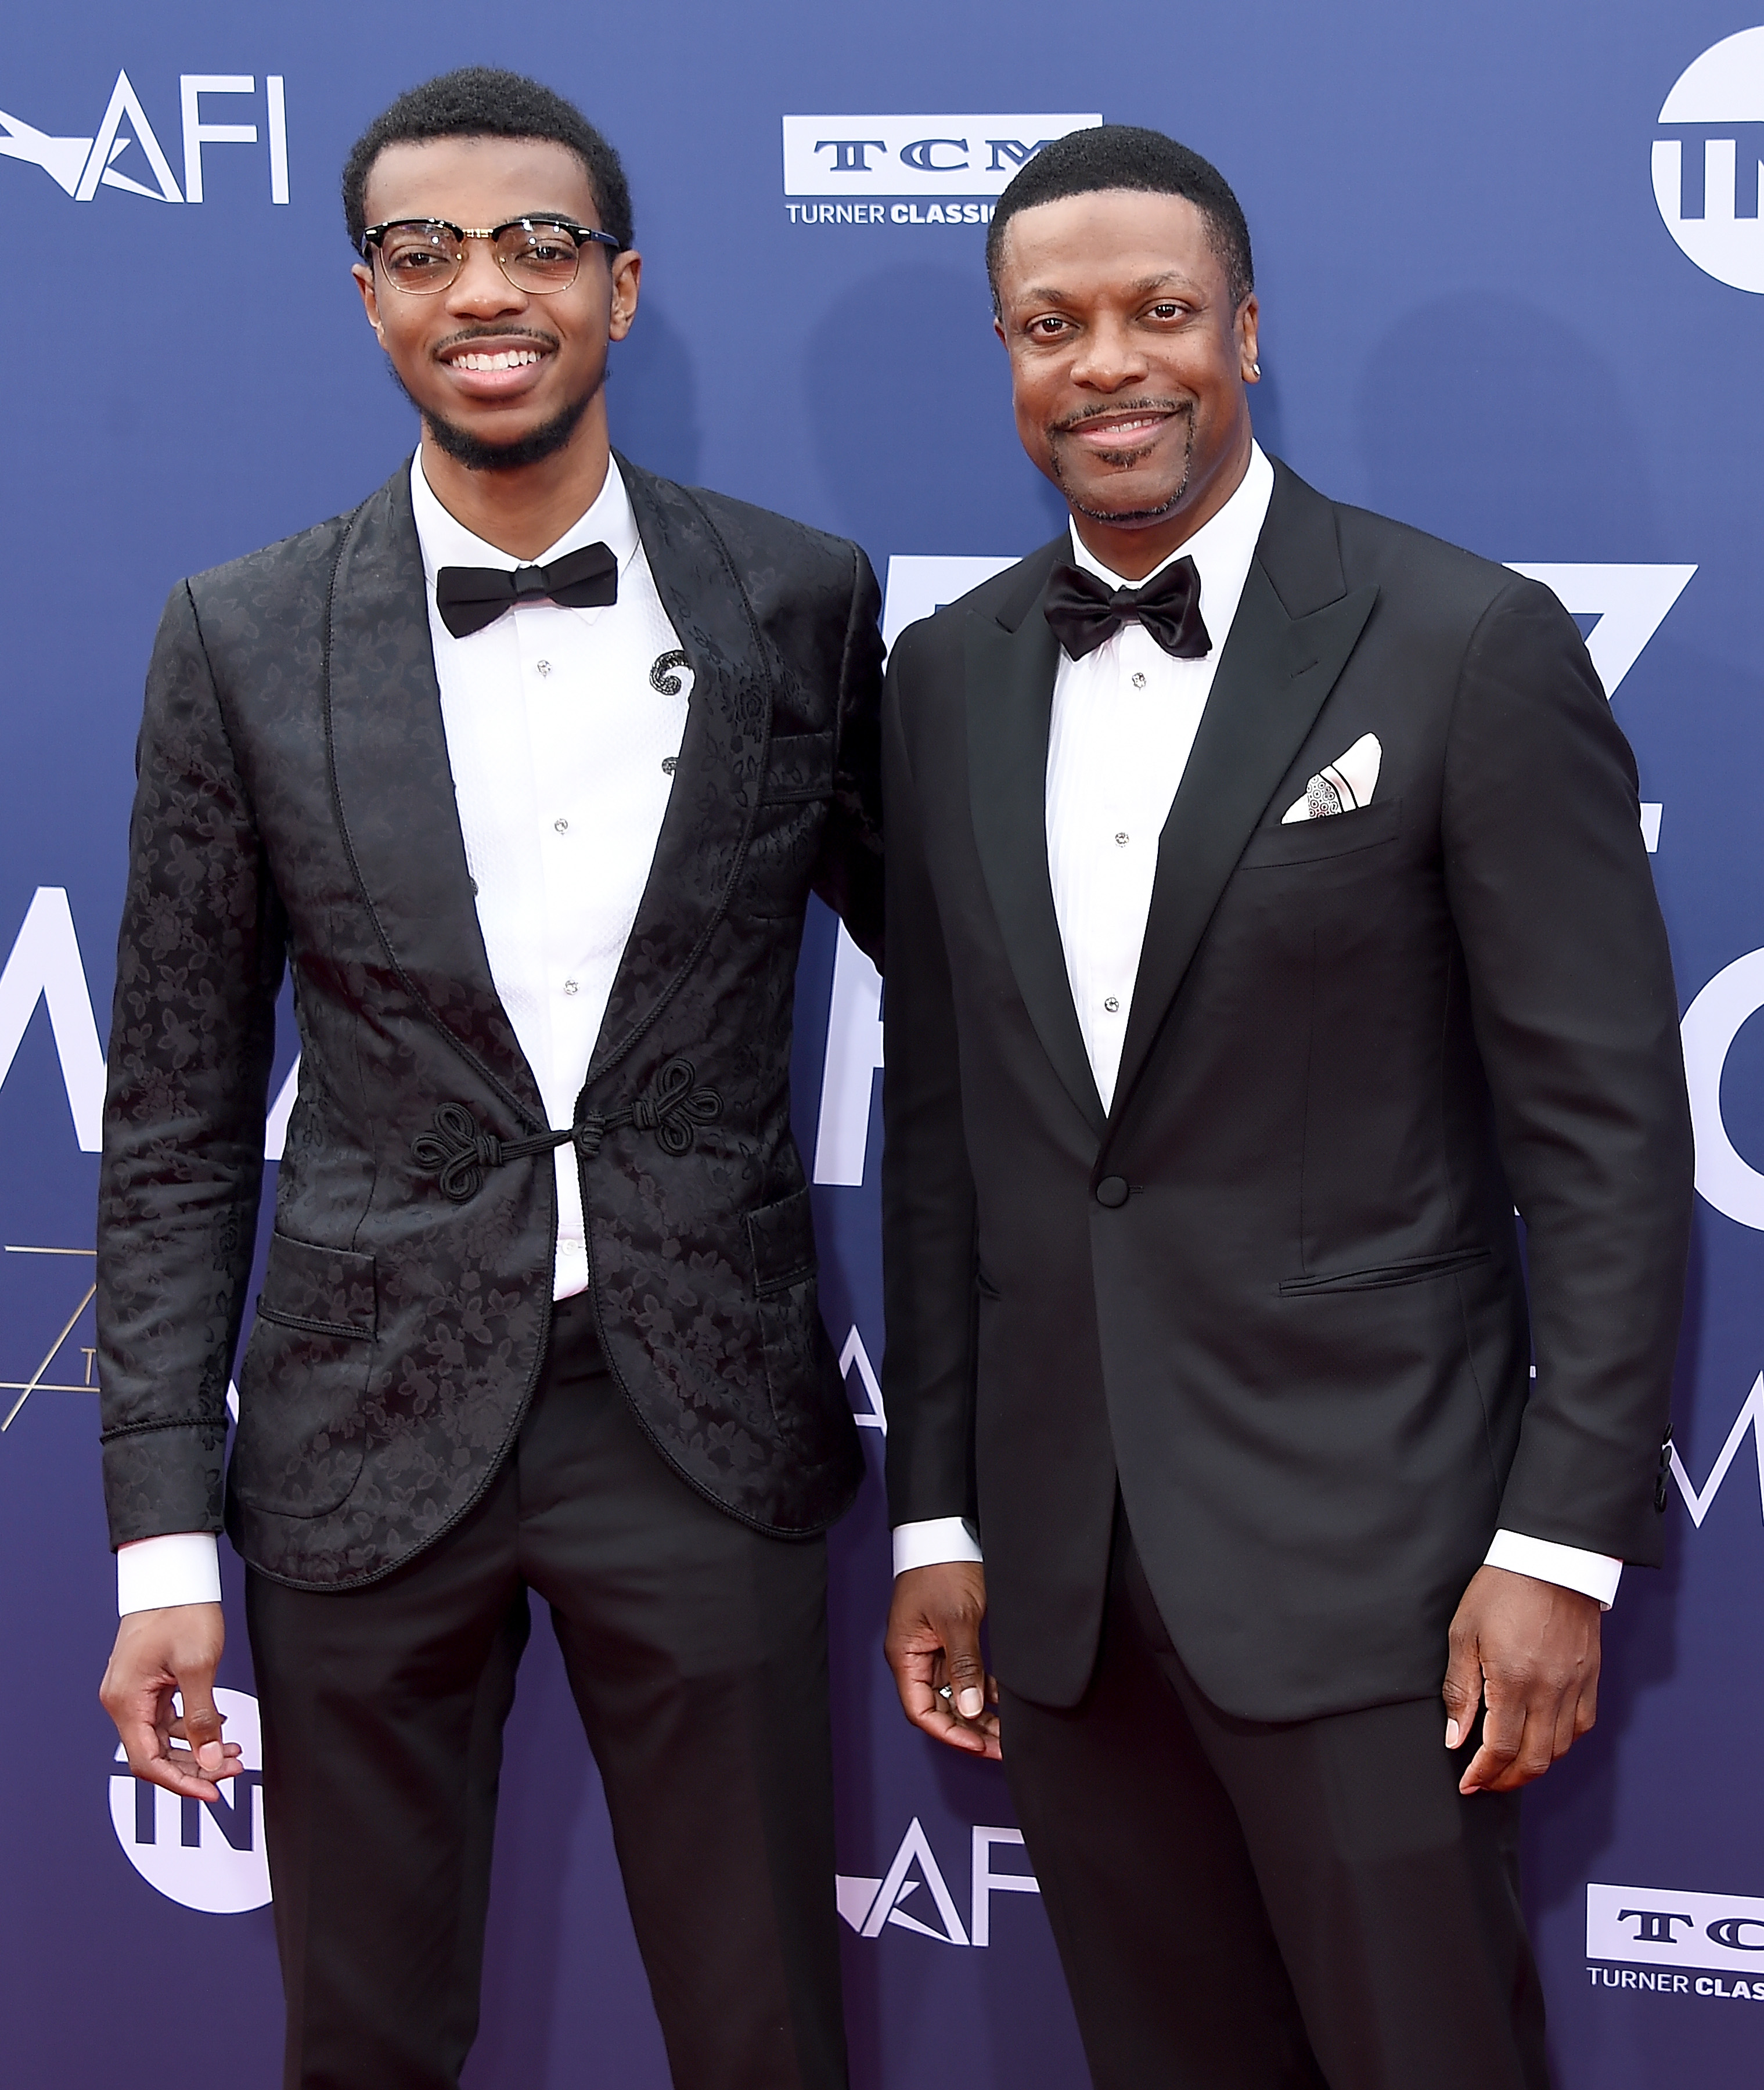 Chris Tucker and Destin Christopher Tucker during the American Film Institute's 47th Life Achievement Award Gala Tribute To Denzel Washington at Dolby Theatre on June 6, 2019, in Hollywood, California. | Source: Getty Images